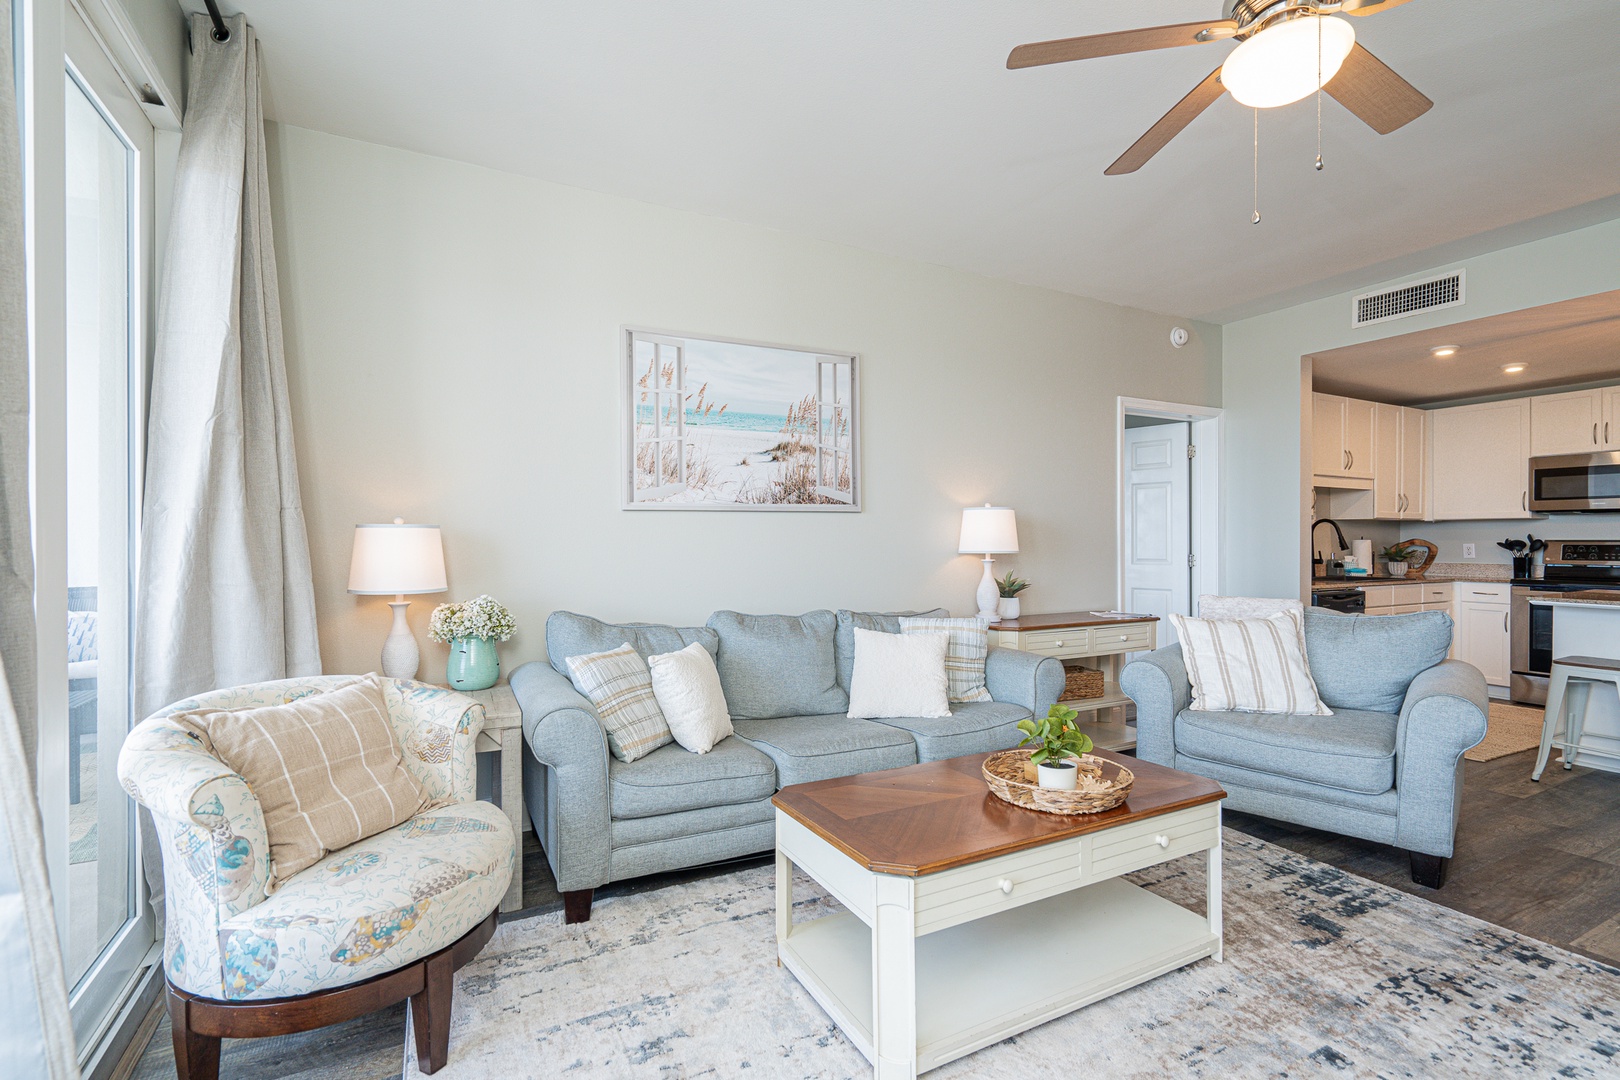 Coastal comfort awaits in the living room, with Smart TV & stunning views